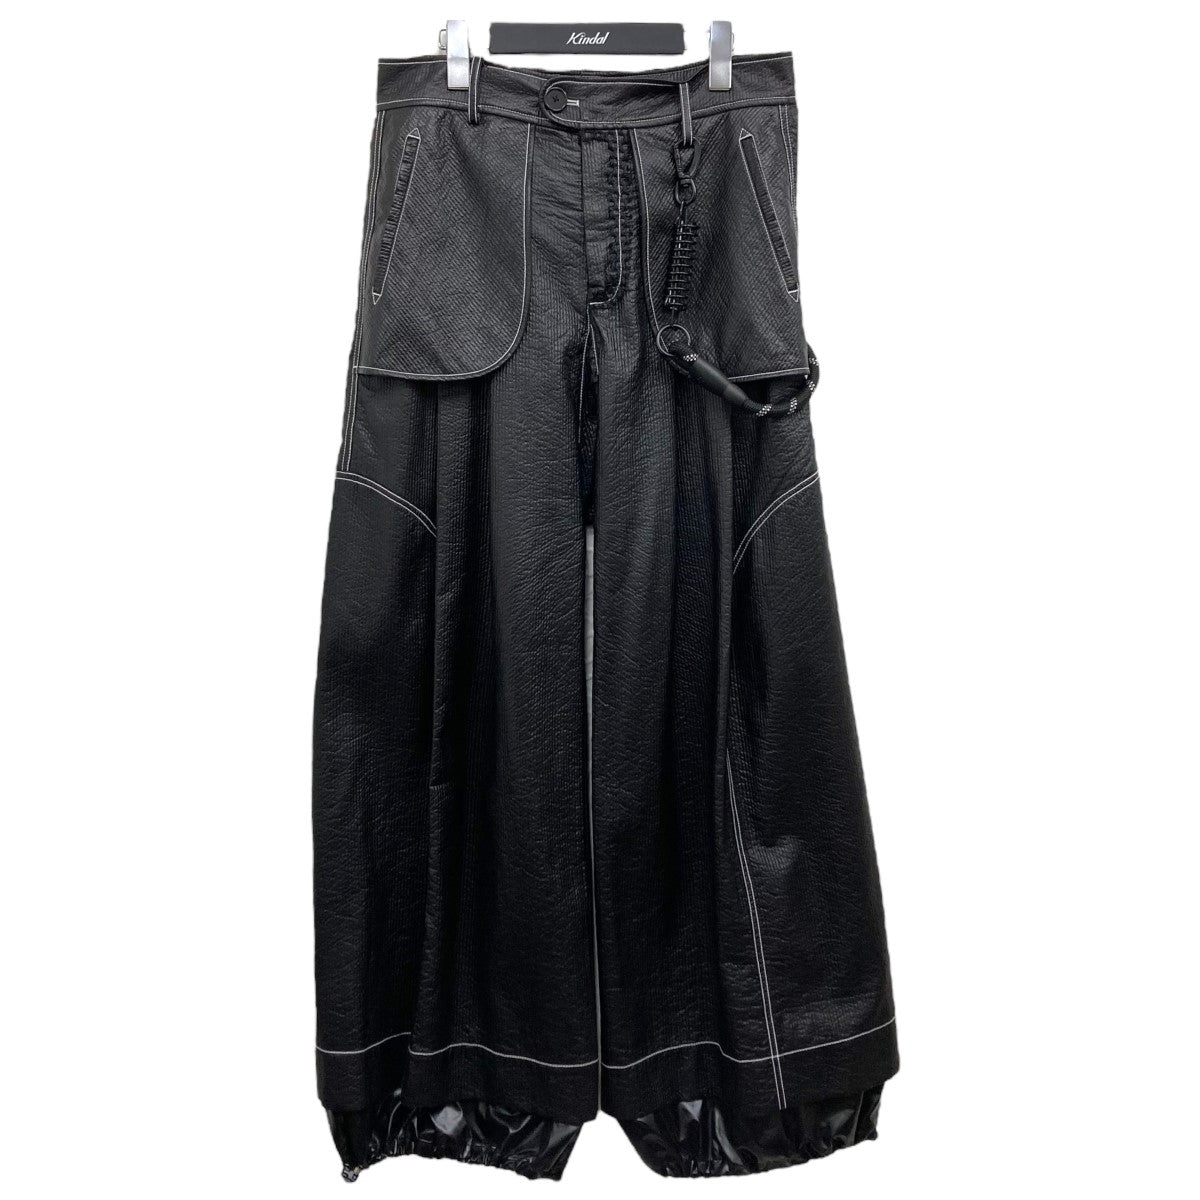 NUTEMPEROR PU LEATHER WIDE PANTS ズボンYofficial